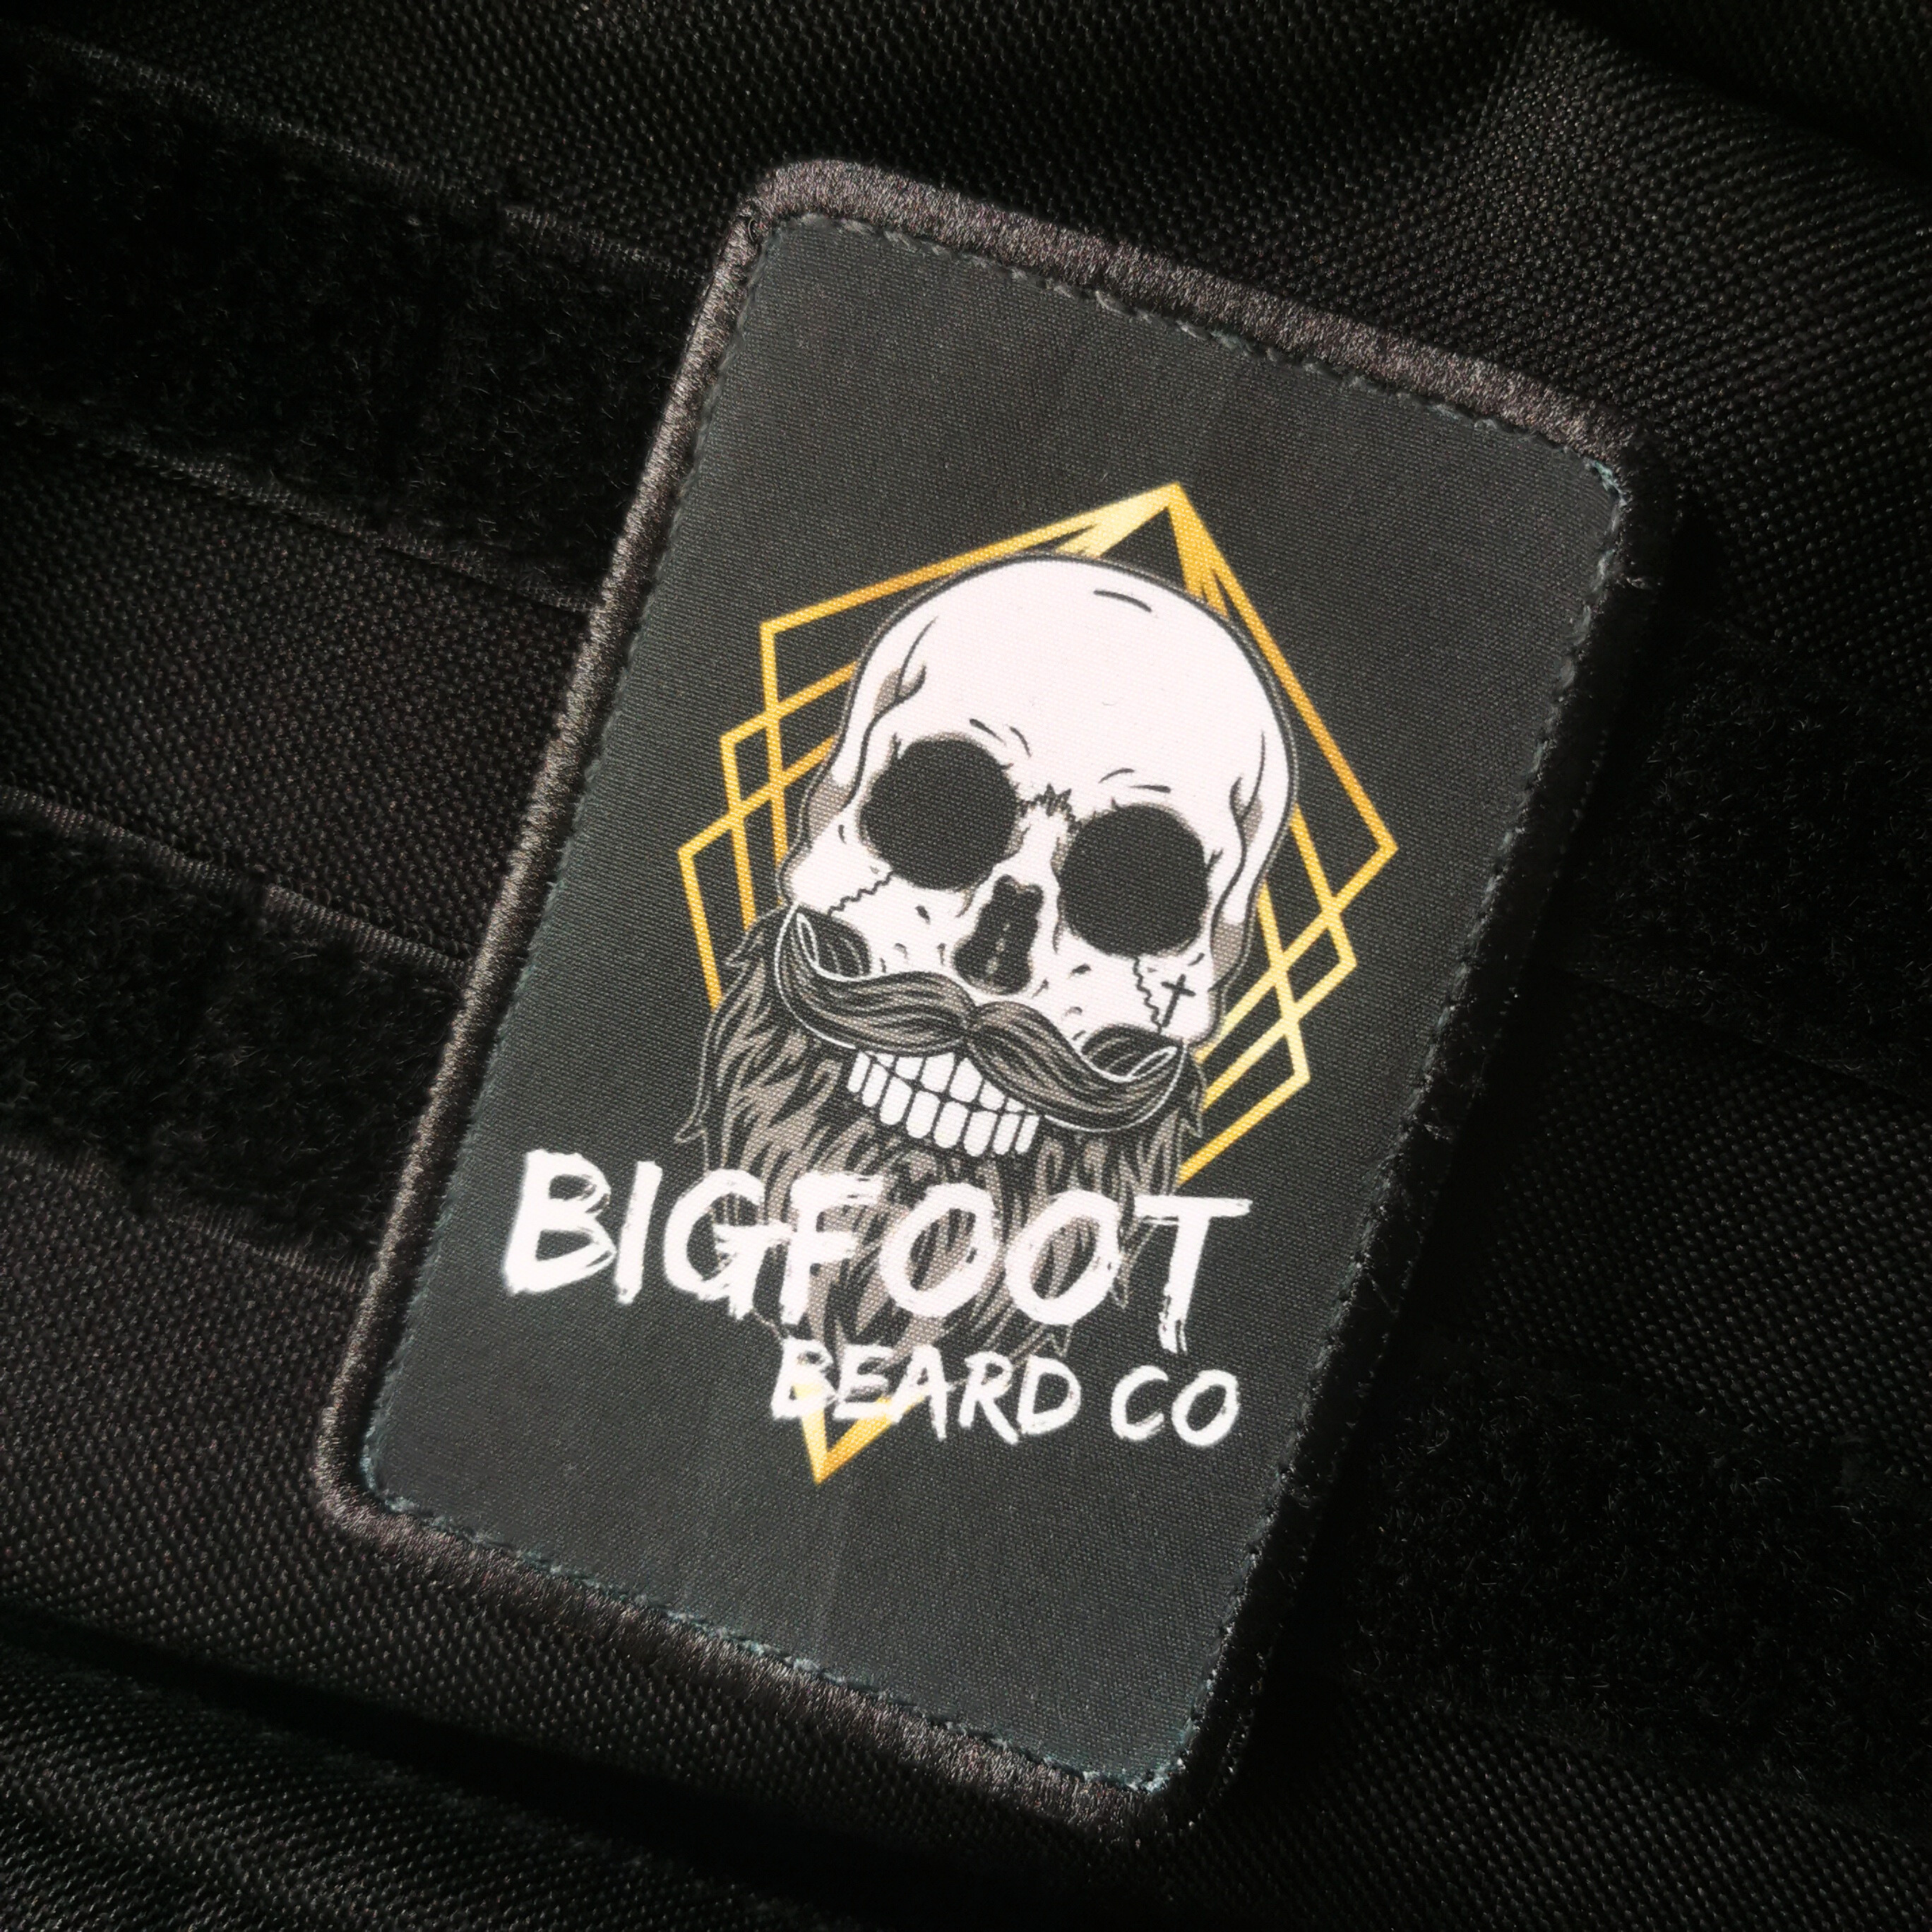 Bigfoot Beard Co Tactical Backpack with velcro logo patch